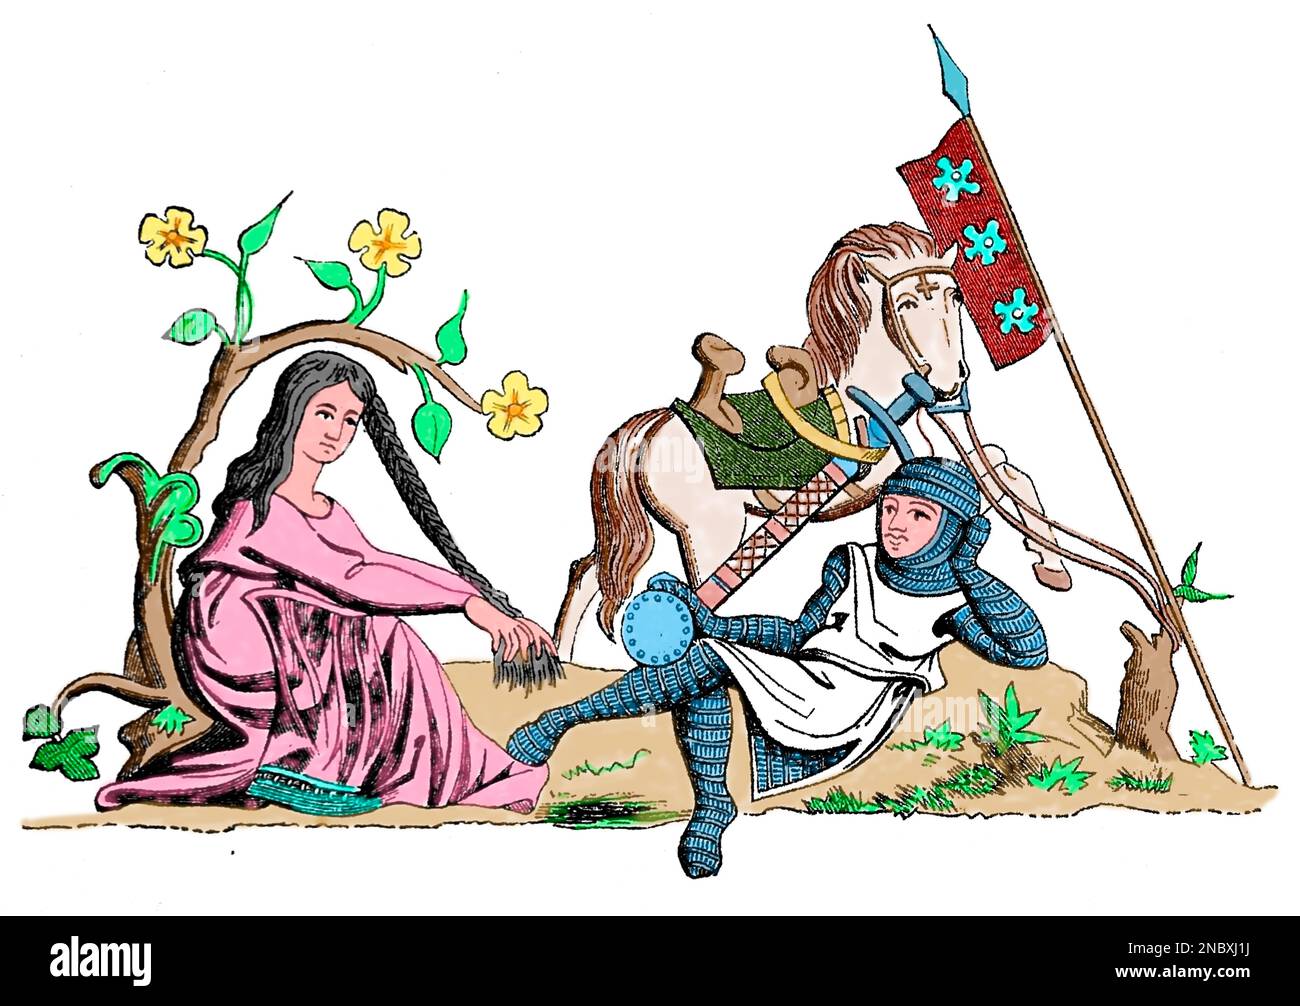 Courtly love. Woman under the safeguard of Knighthood. Engraving. Stock Photo